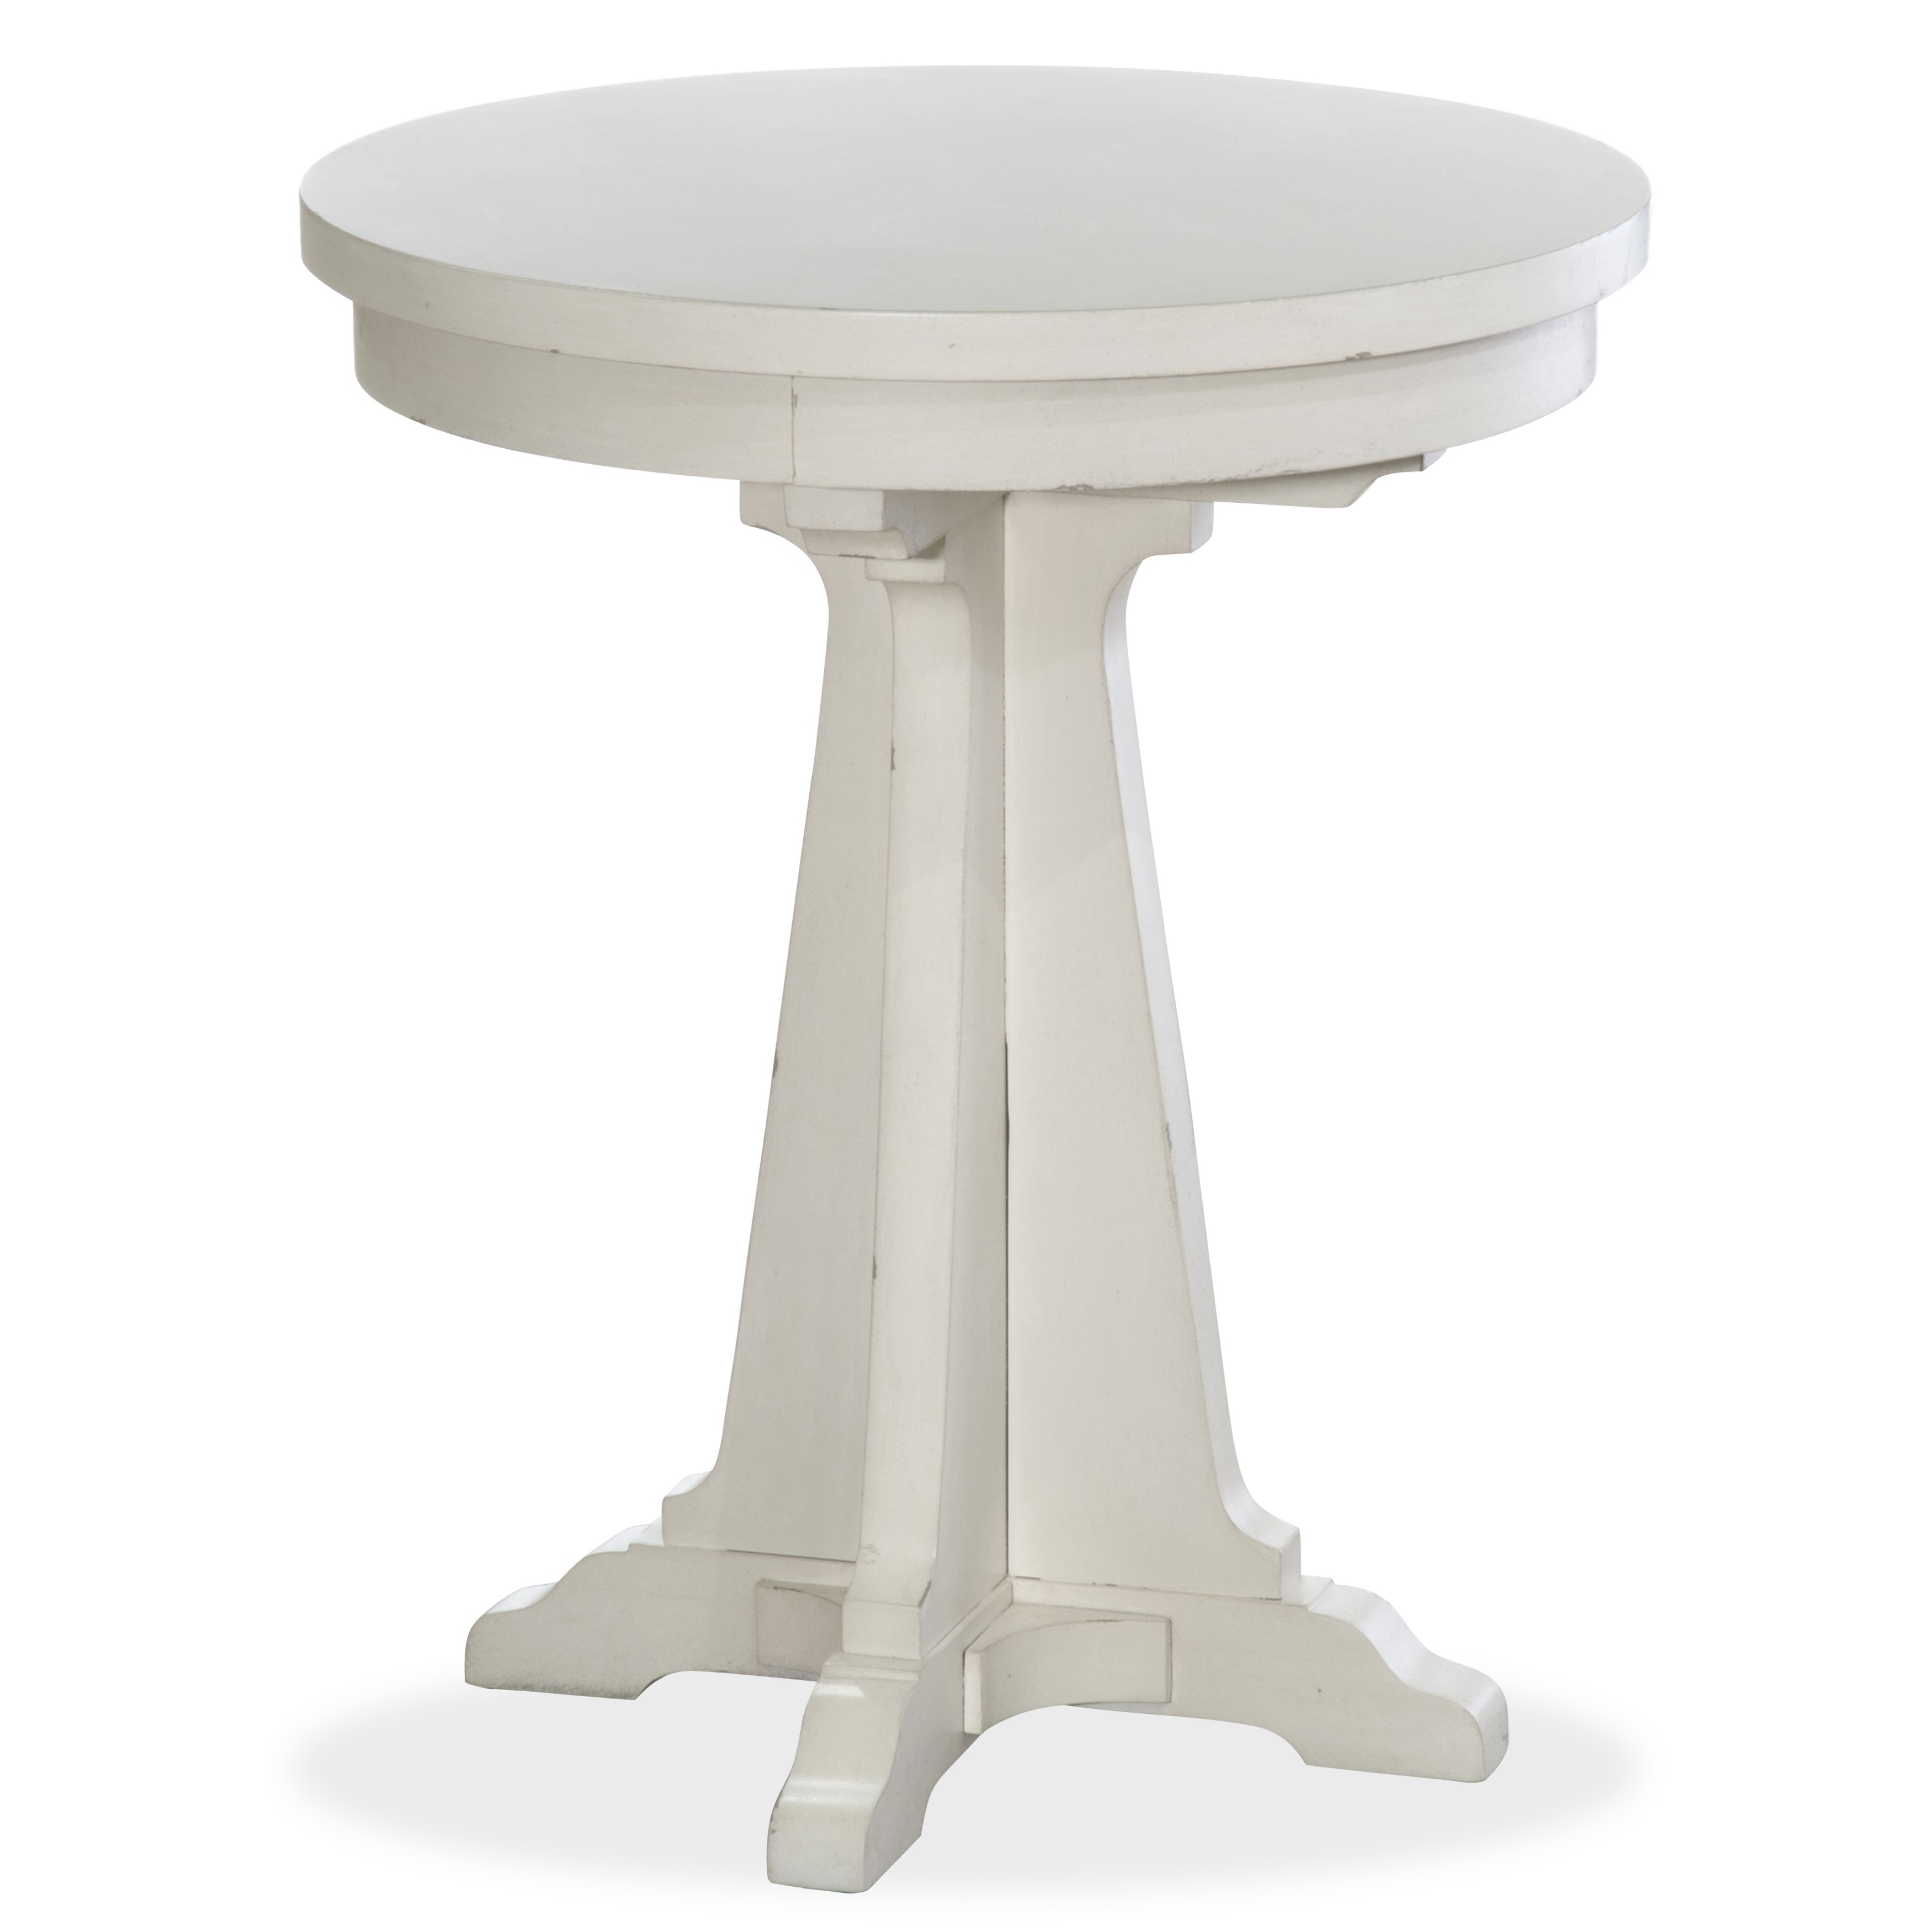 coventry lane farmhouse antique white round accent table free shipping today mirrored bedside lamps small oak side tables for living room dining outdoor barbecue ikea wooden